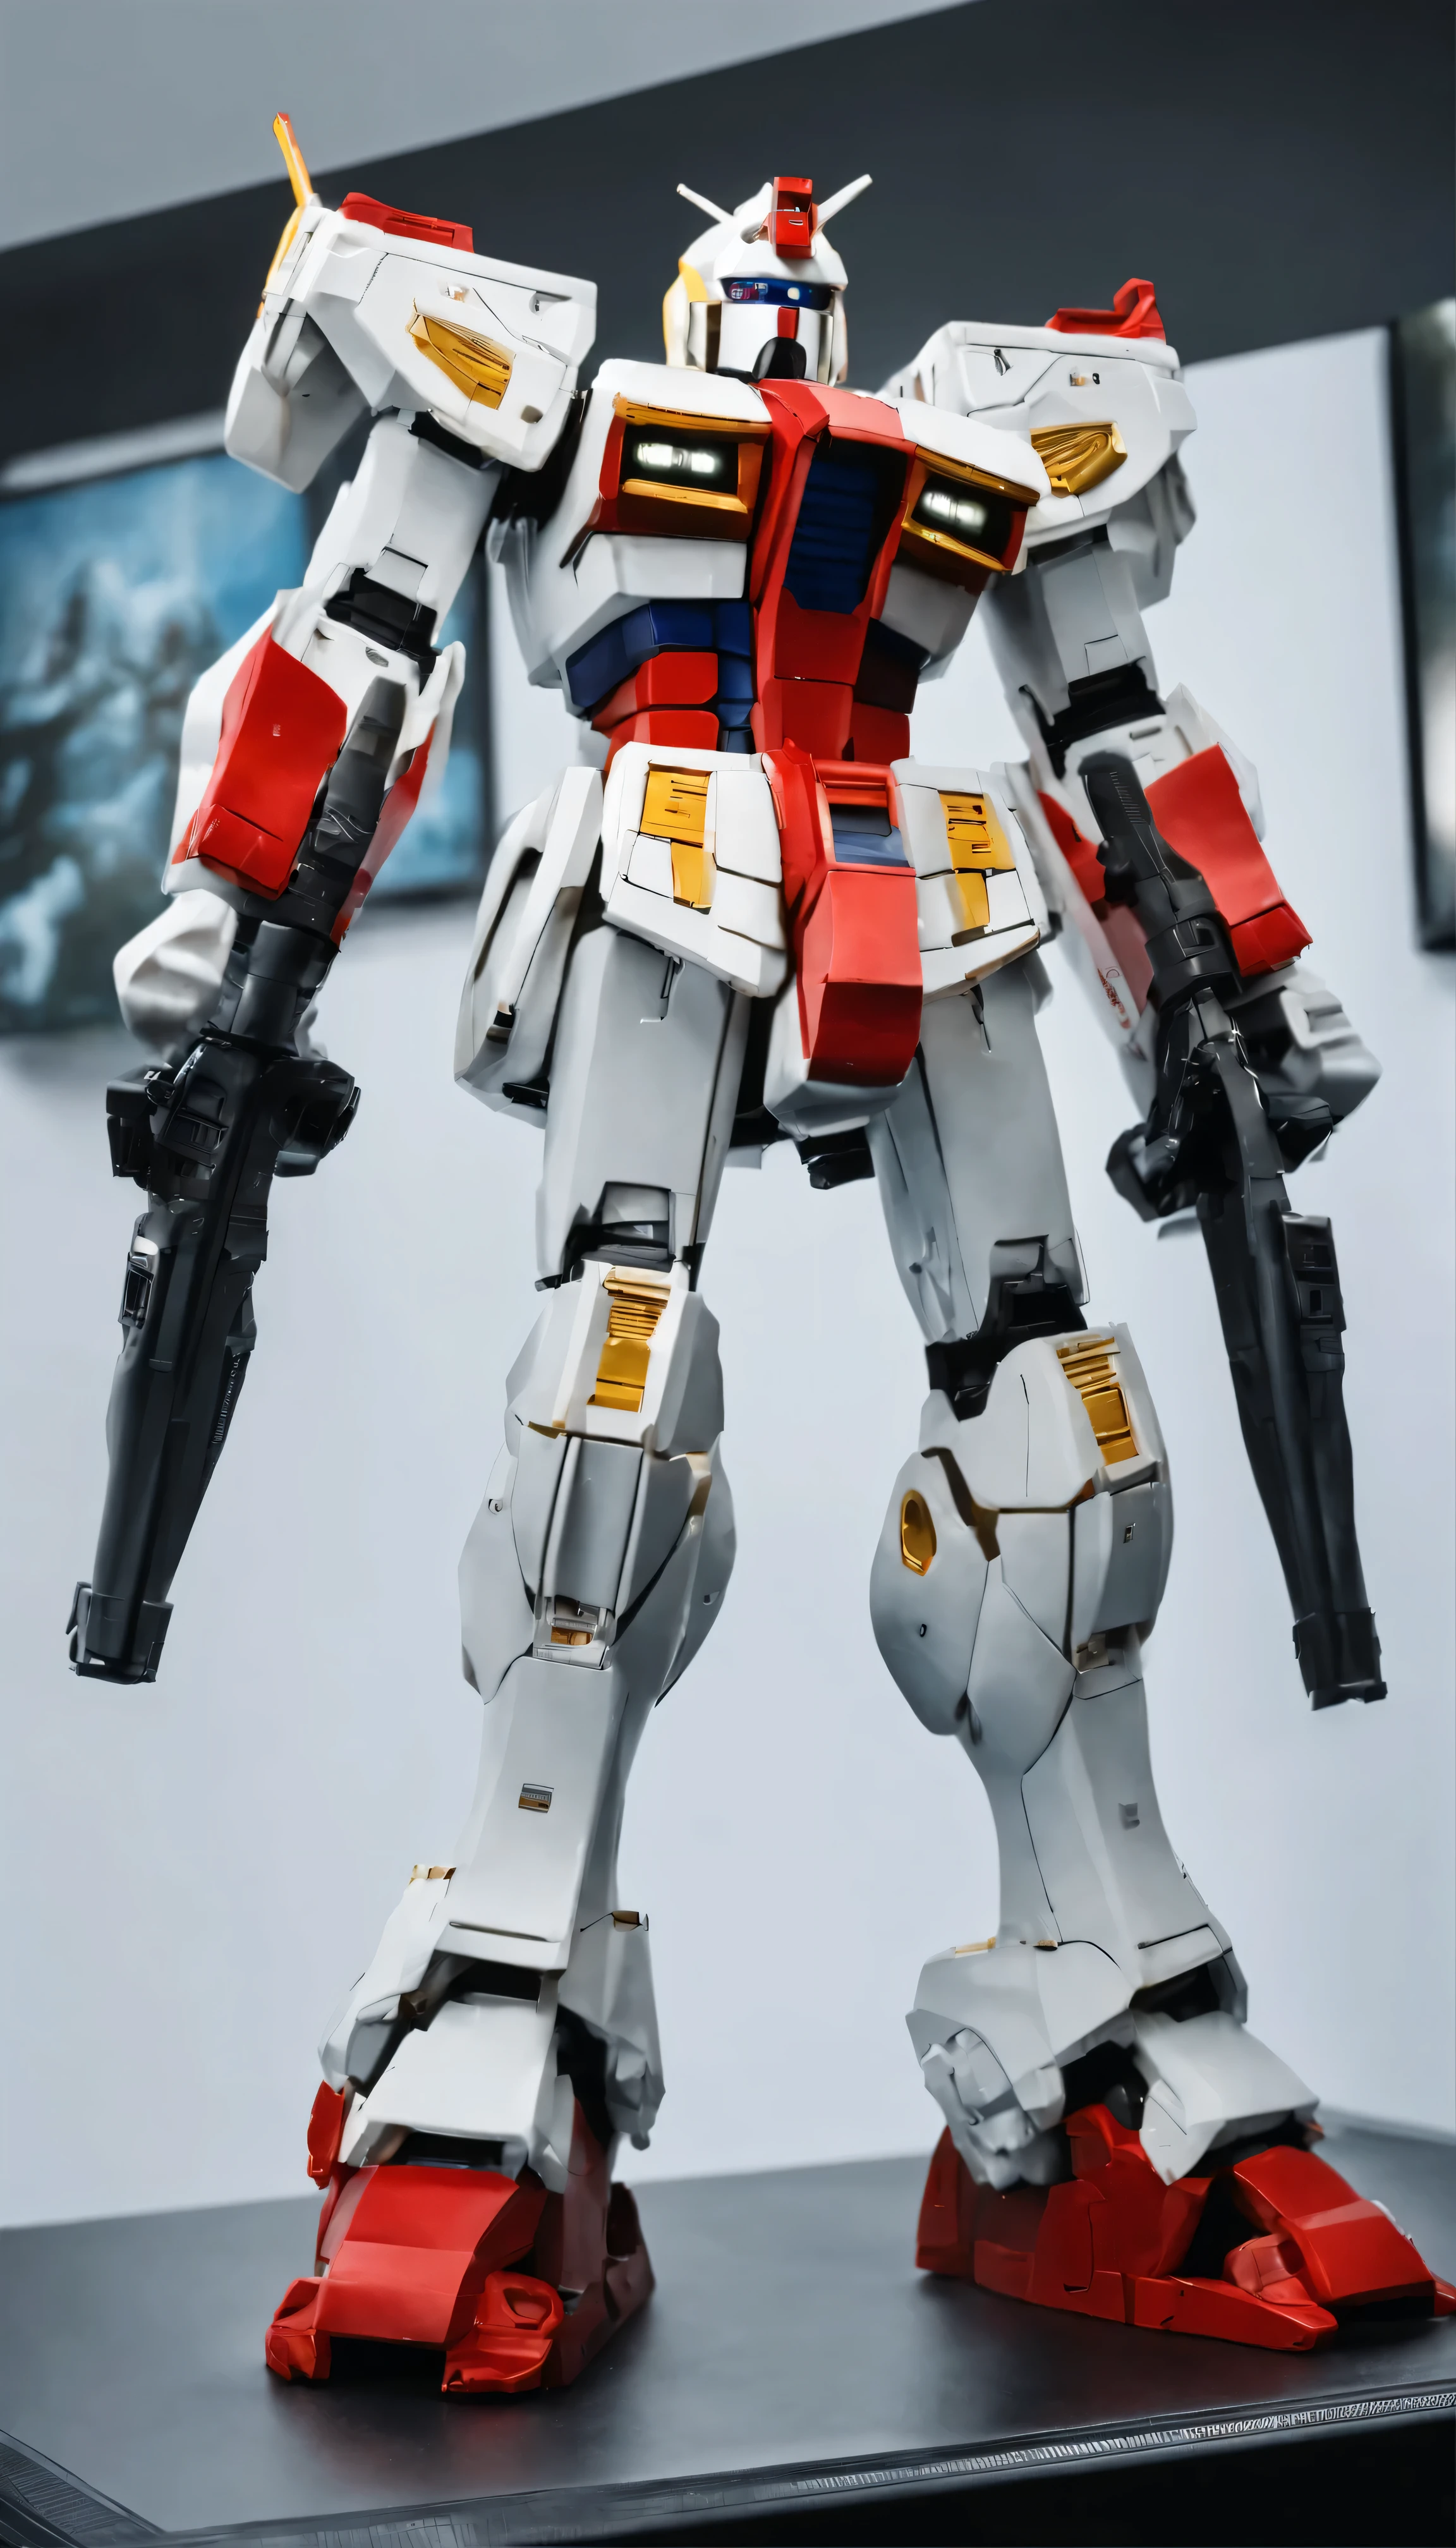 Anime Gundam figures with intricate details and high definition images、Presenting a towering robot figure in full-body, 3D-accurate content。Each panel and joint is carefully crafted、Crafting iconic designs with exceptional precision and quality。The figure is tall and imposing.々and、We are ready to protect the universe in the best possible way.。 Adult bedrooms are clean and tidy.、The large windows offer a view of the outside.。Gundam memorabilia decorates the walls.、The LED light display creates a sense of realism。In the center of the room、There are life-sized Gundam figures on display.、